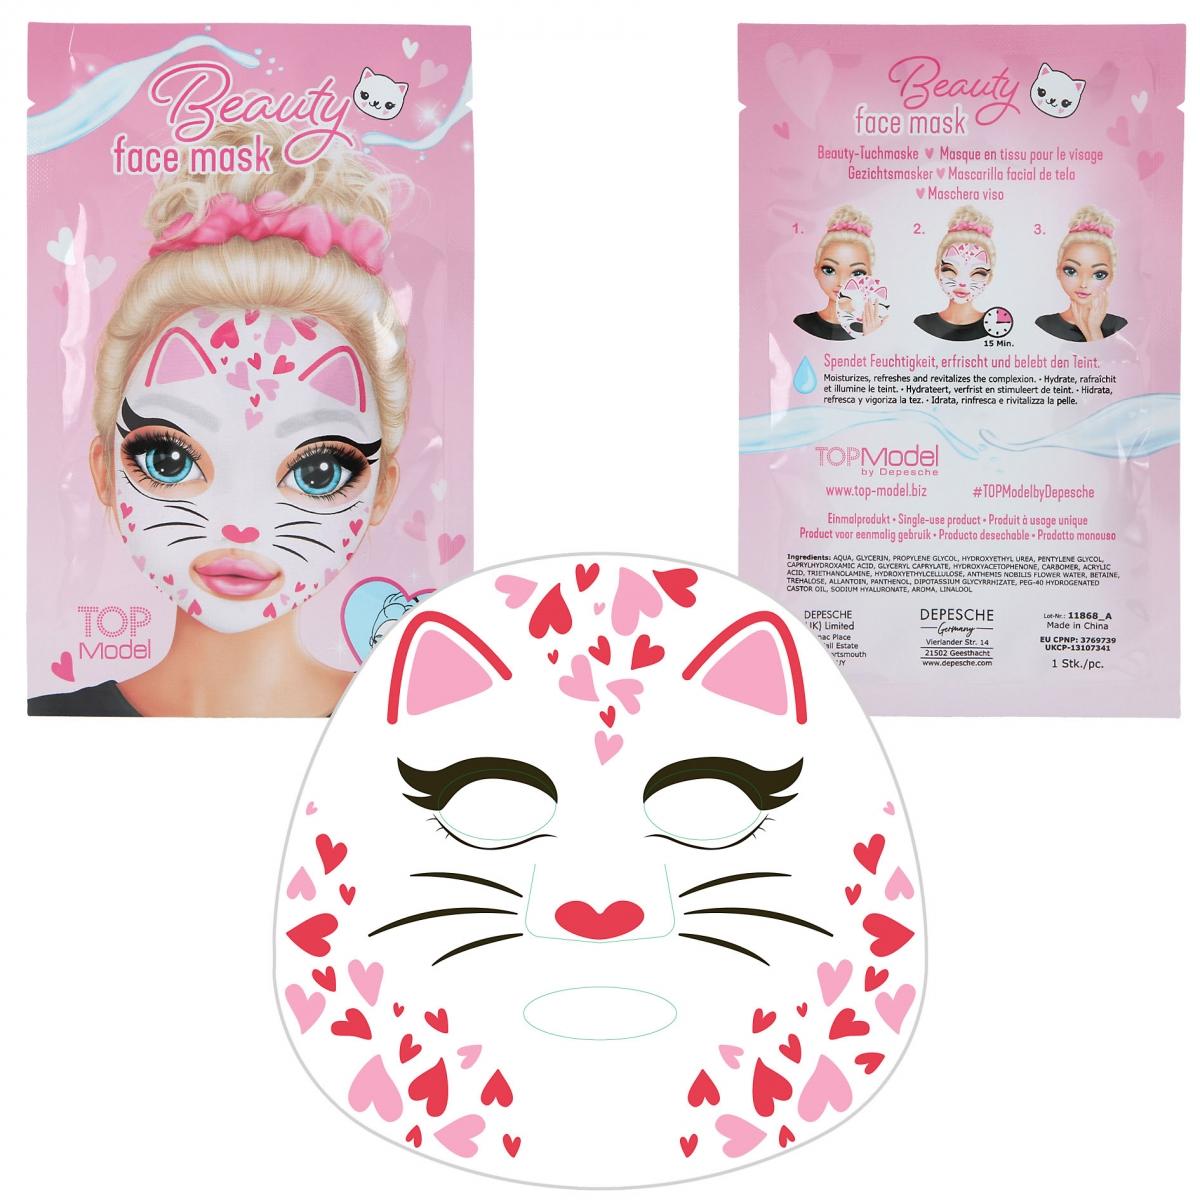 Top Model Beauty facemask